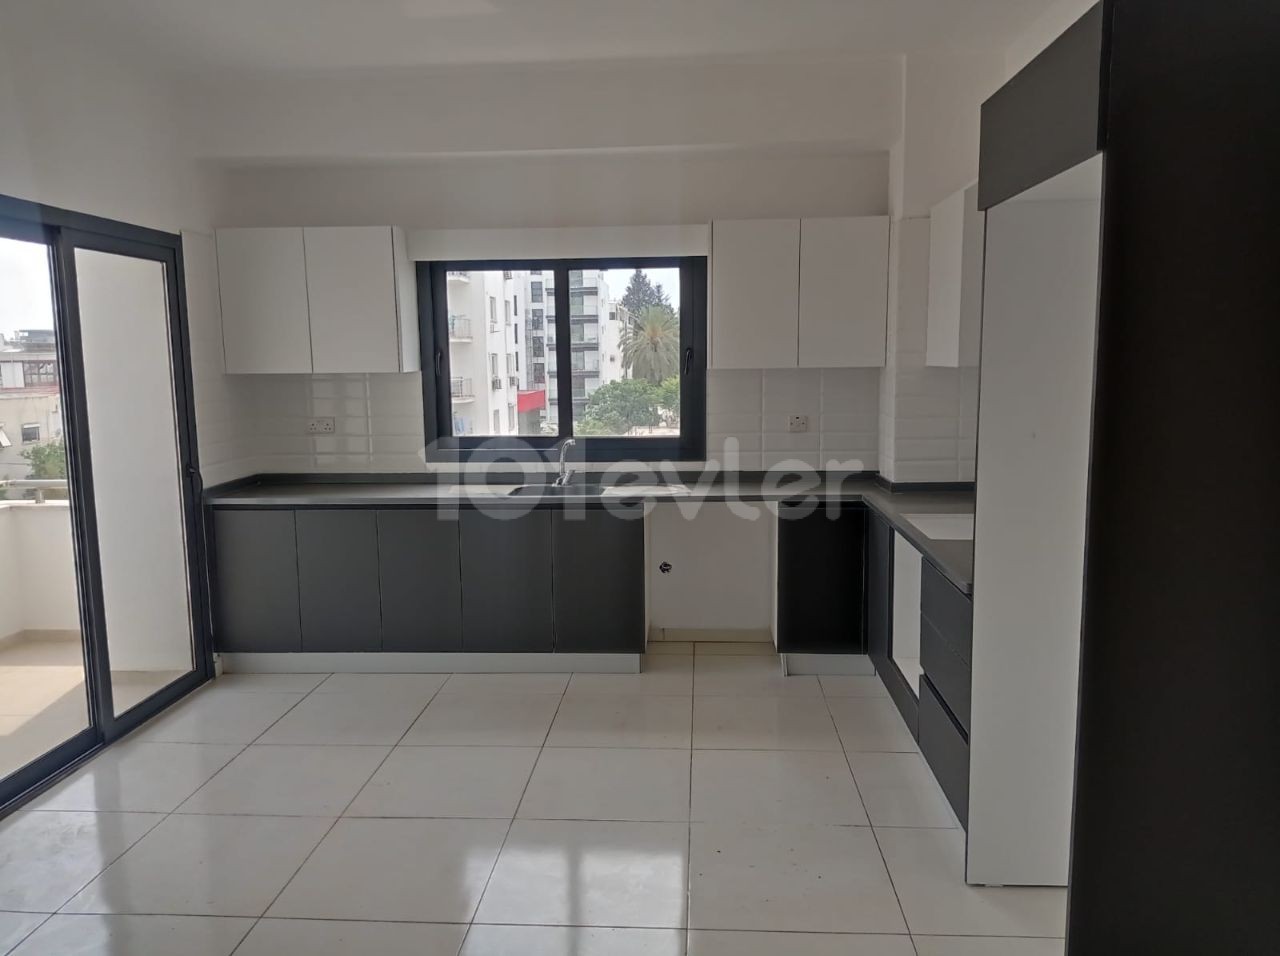 2 + 1 apartments for sale in the central location in the Yenişehir region ** 